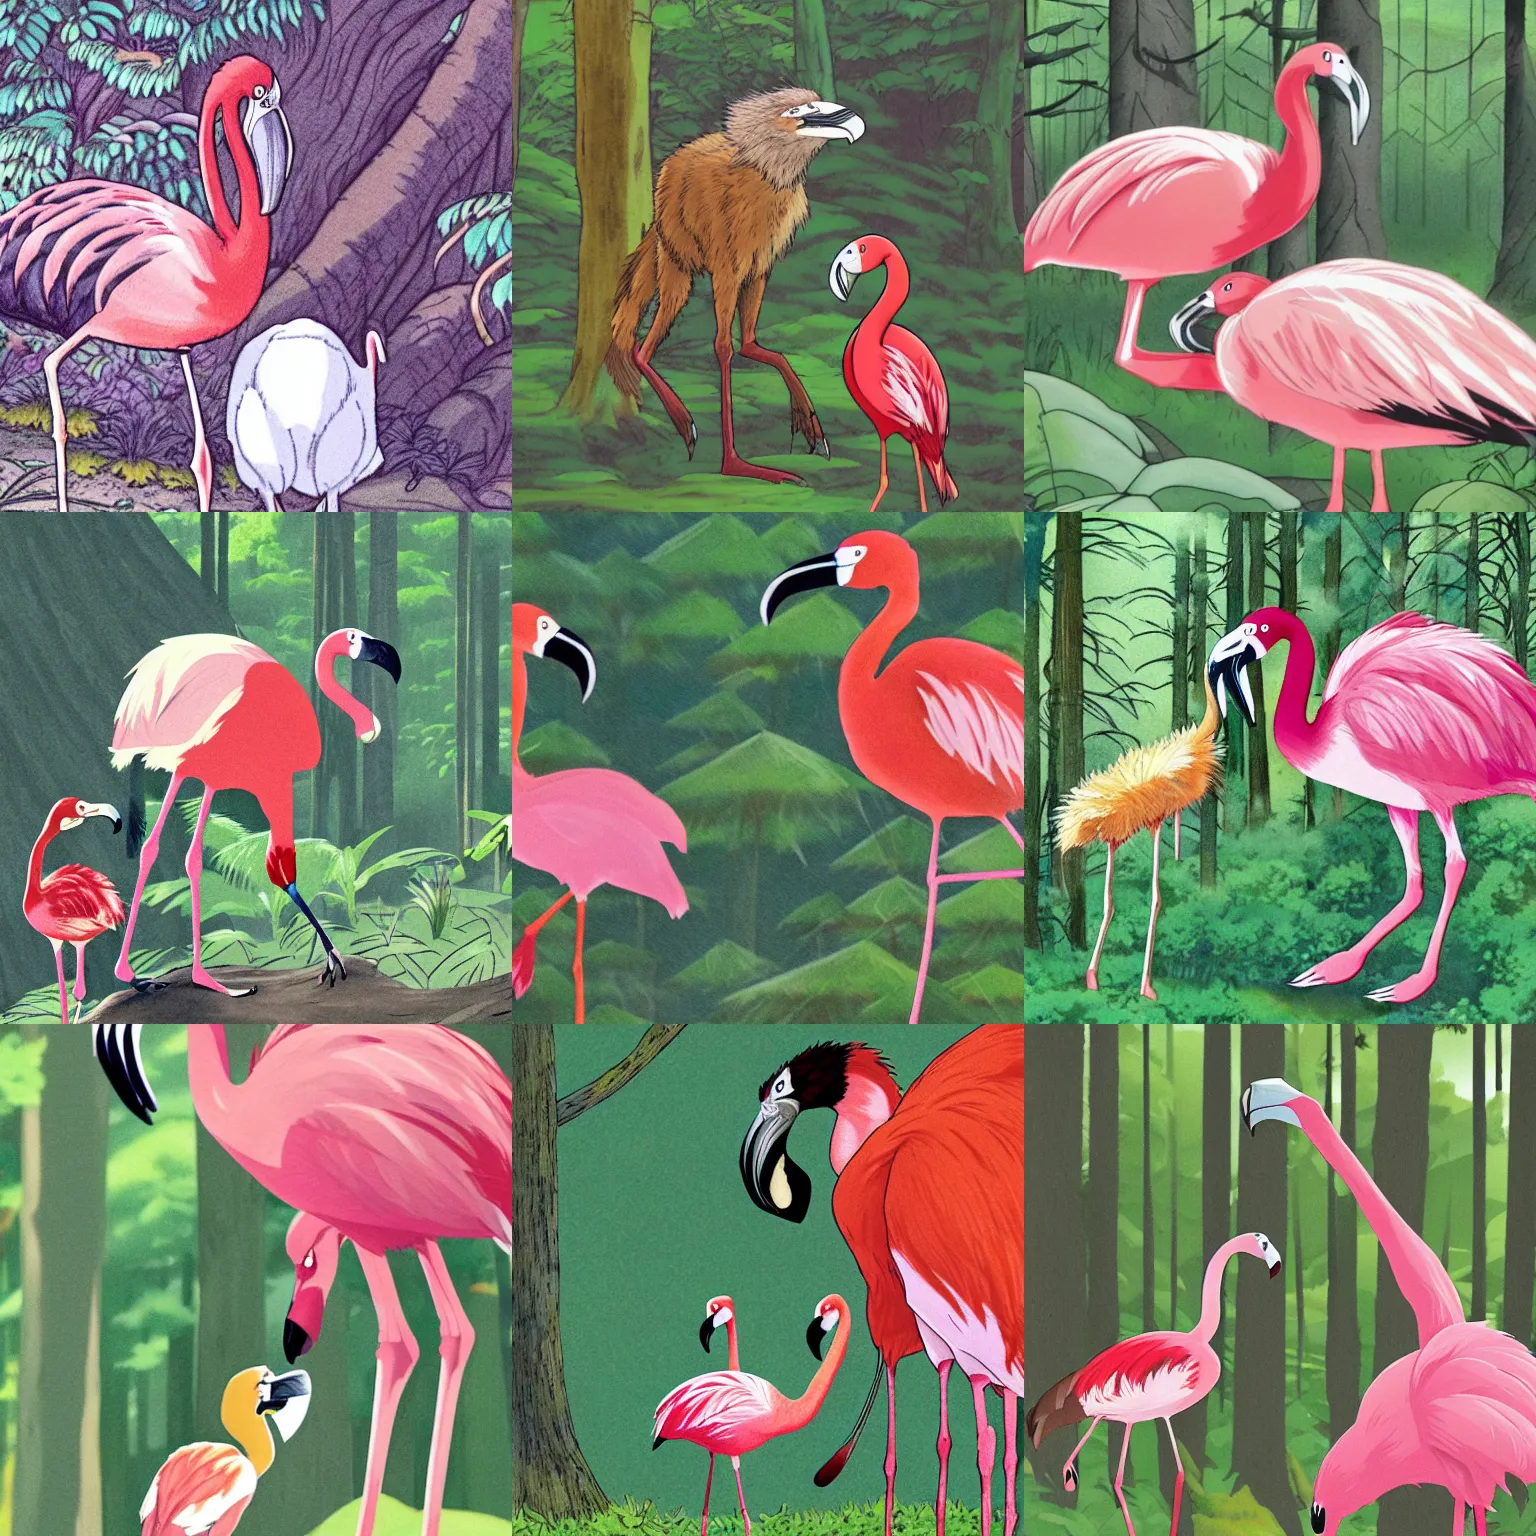 Prompt: close up shot of a wolverine and flamingo standing together in the forest, art by studio ghibli